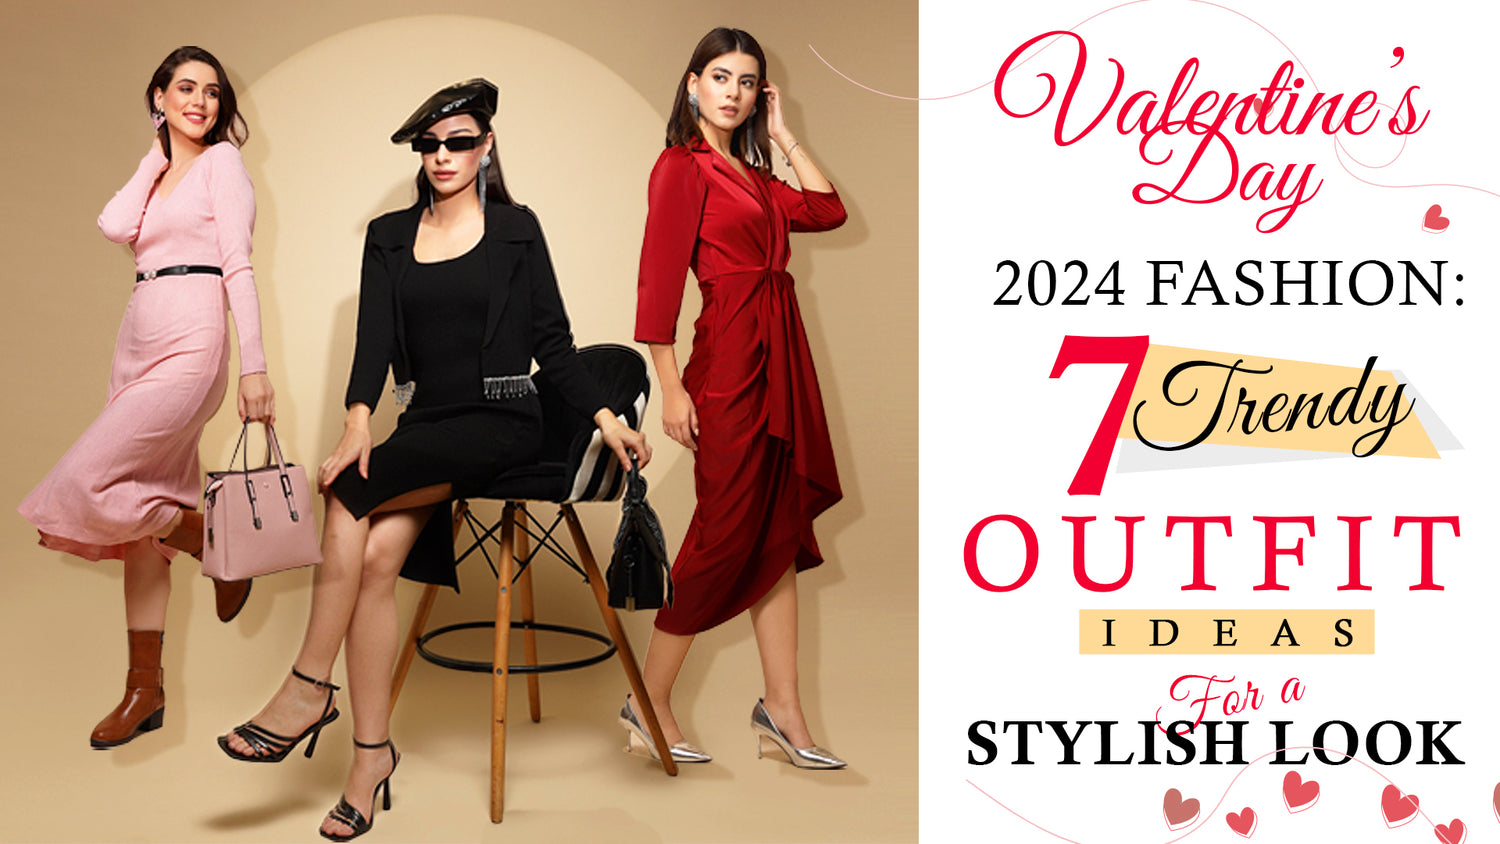 Valentine's Day 2024 Fashion: 7 Trendy Outfit Ideas for a Stylish Look